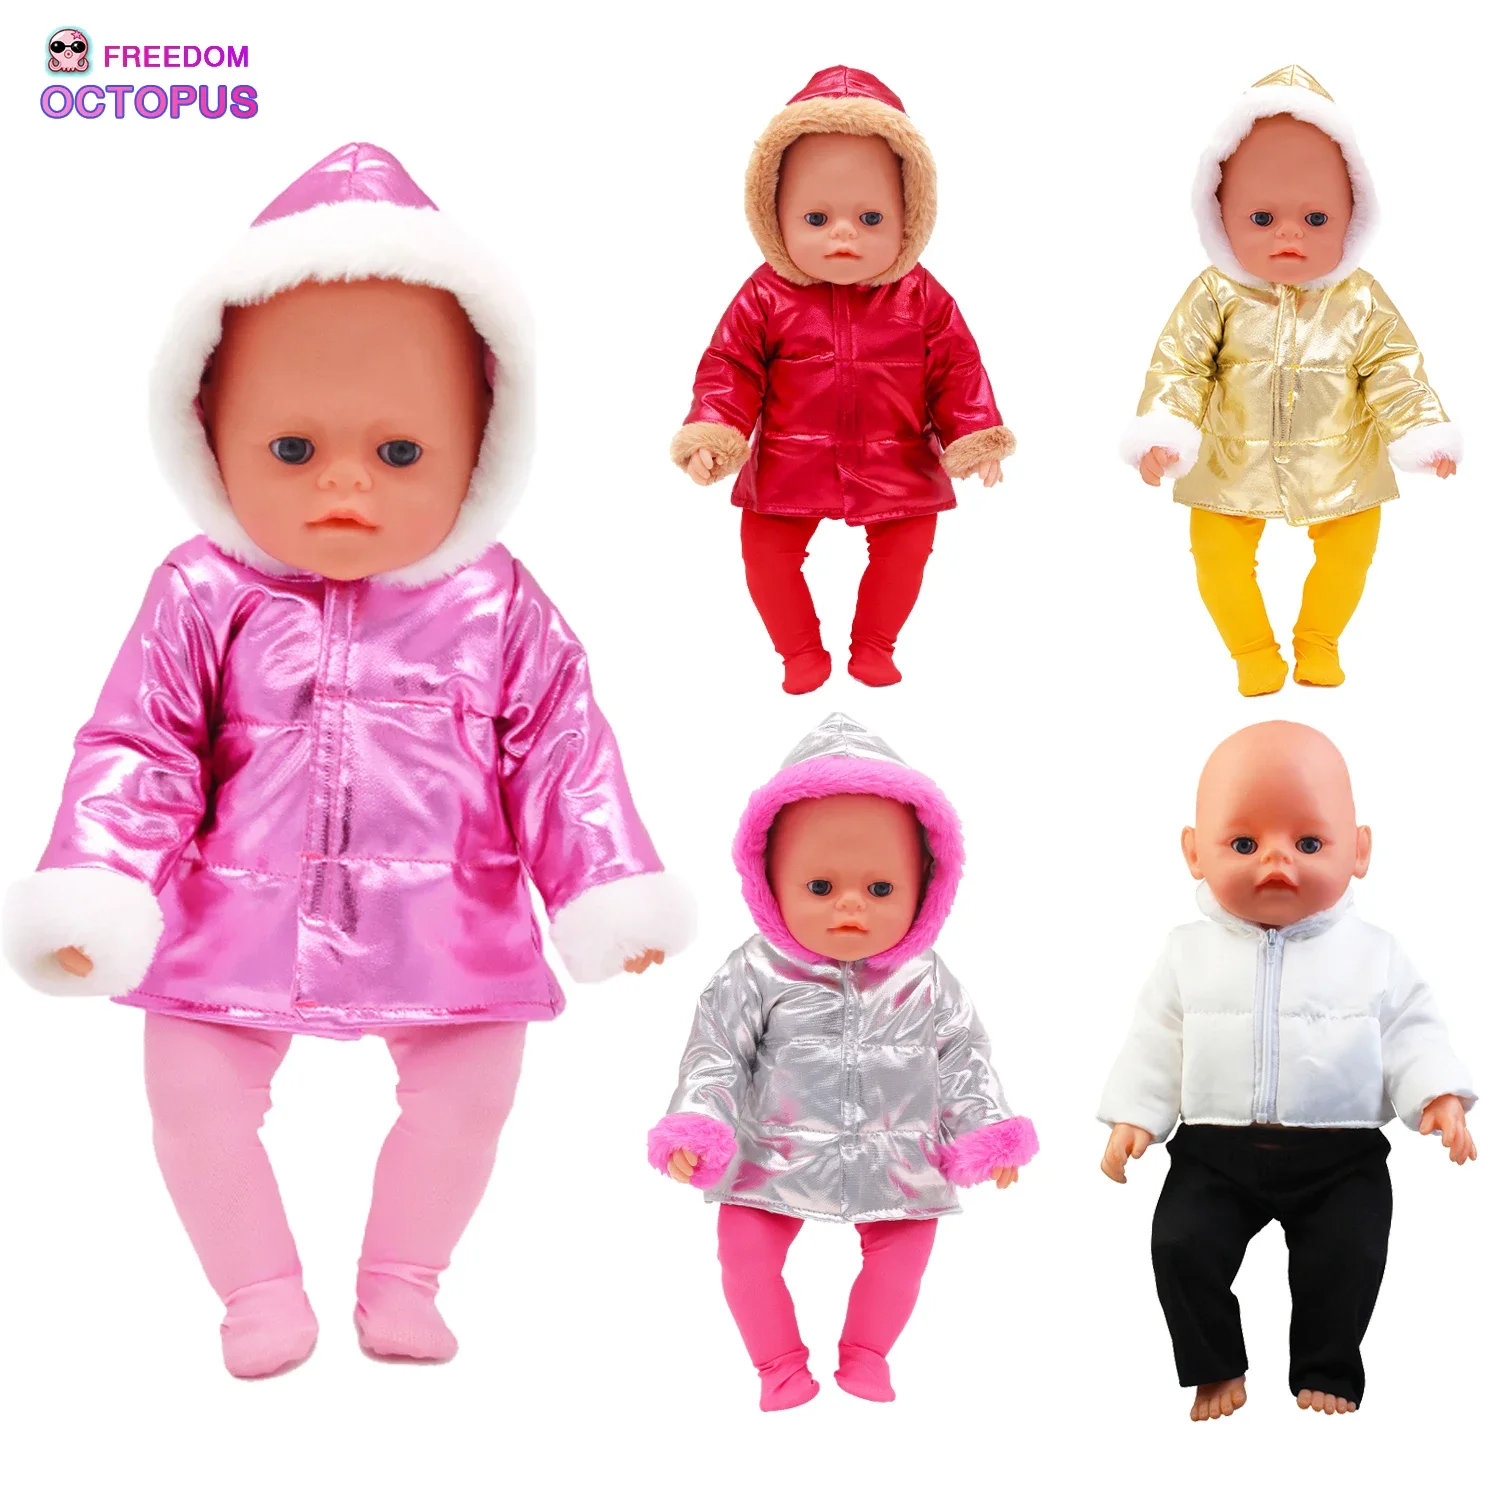 

New Down Jacket + Leggings Doll Clothes Fit For 17 Inch& 43cm Baby New Born Doll Clothes Suit Reborn Doll Outfit Accessories Toy